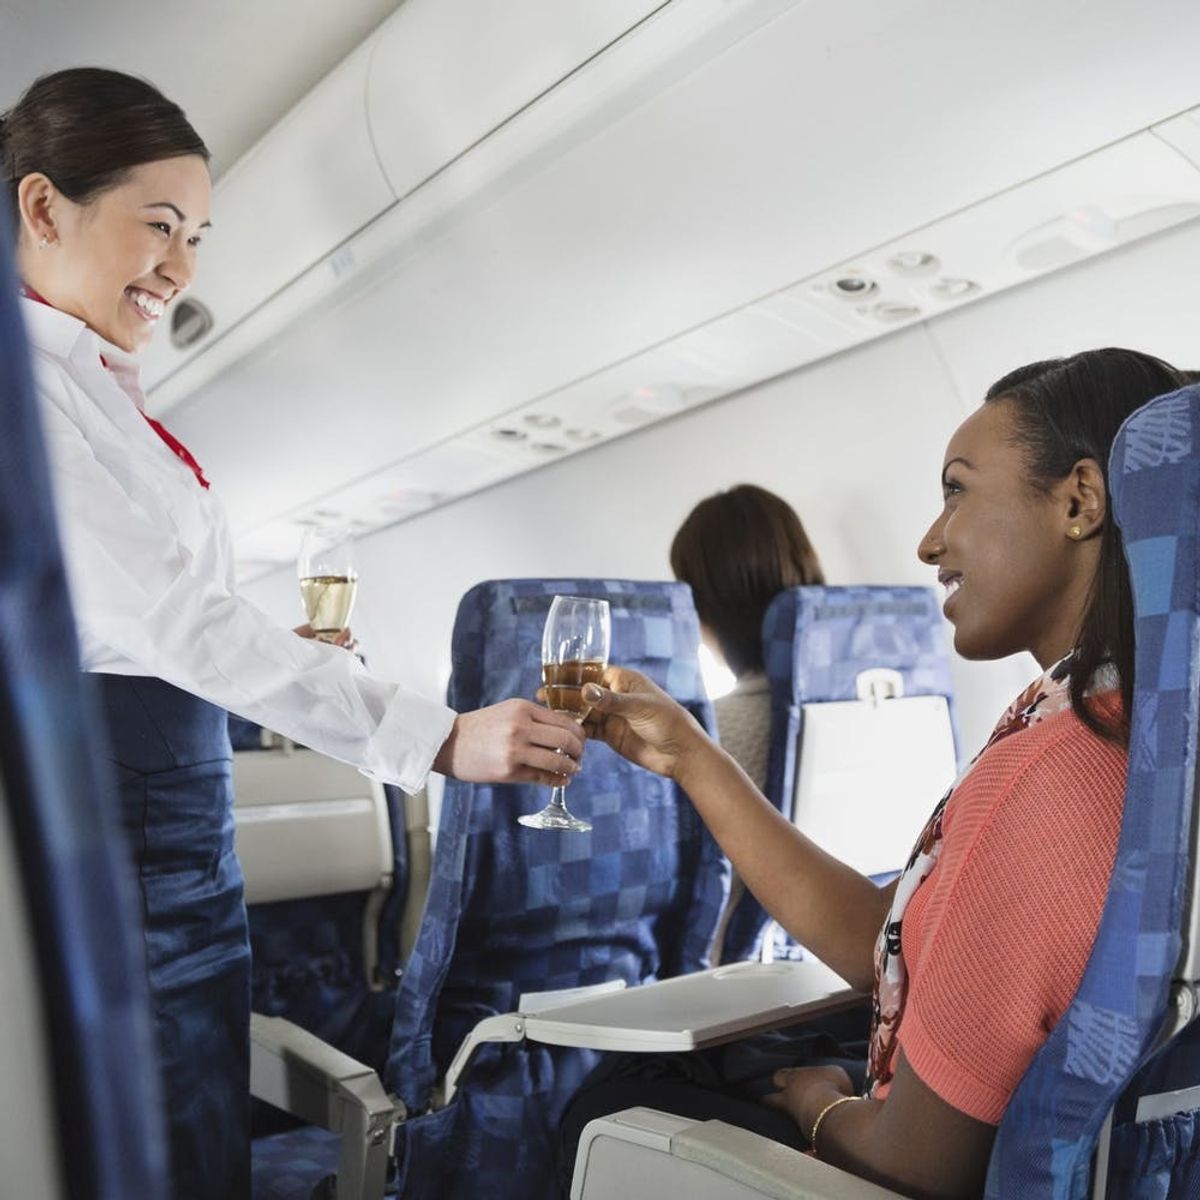 This Popular Airline Is Making It Easier to Score Free Wine in Economy